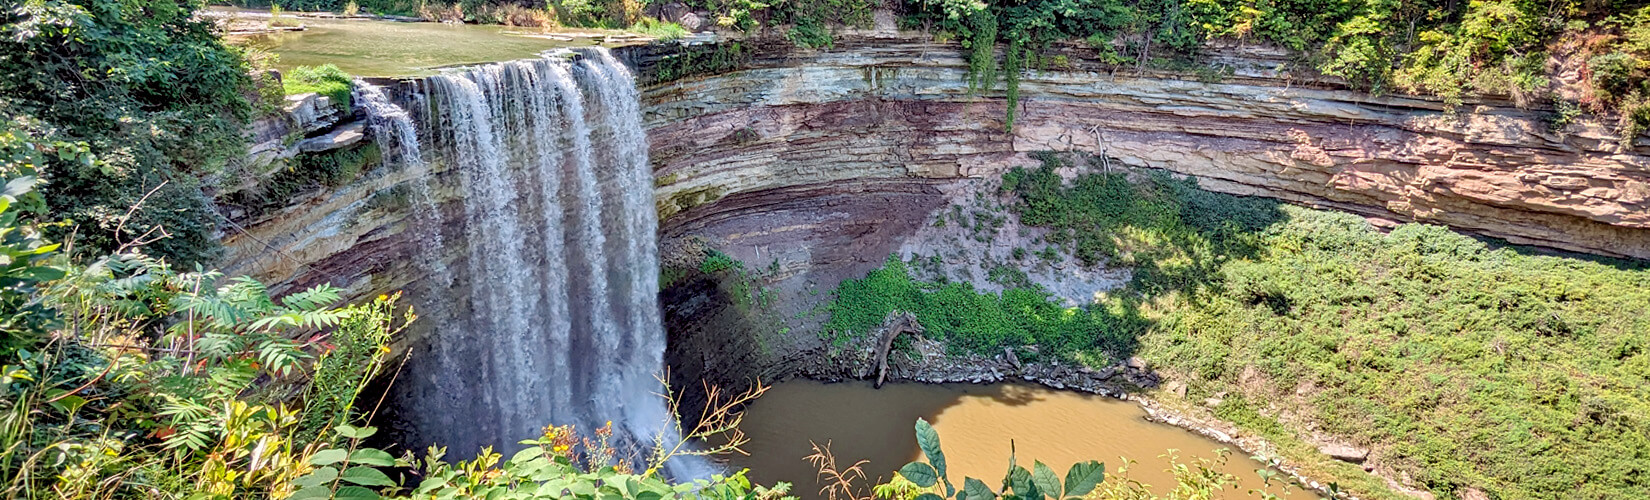 Balls Falls Conservation Area: Gorgeous Waterfalls, History & More in Niagara :: I've Been Bit! Travel Blog